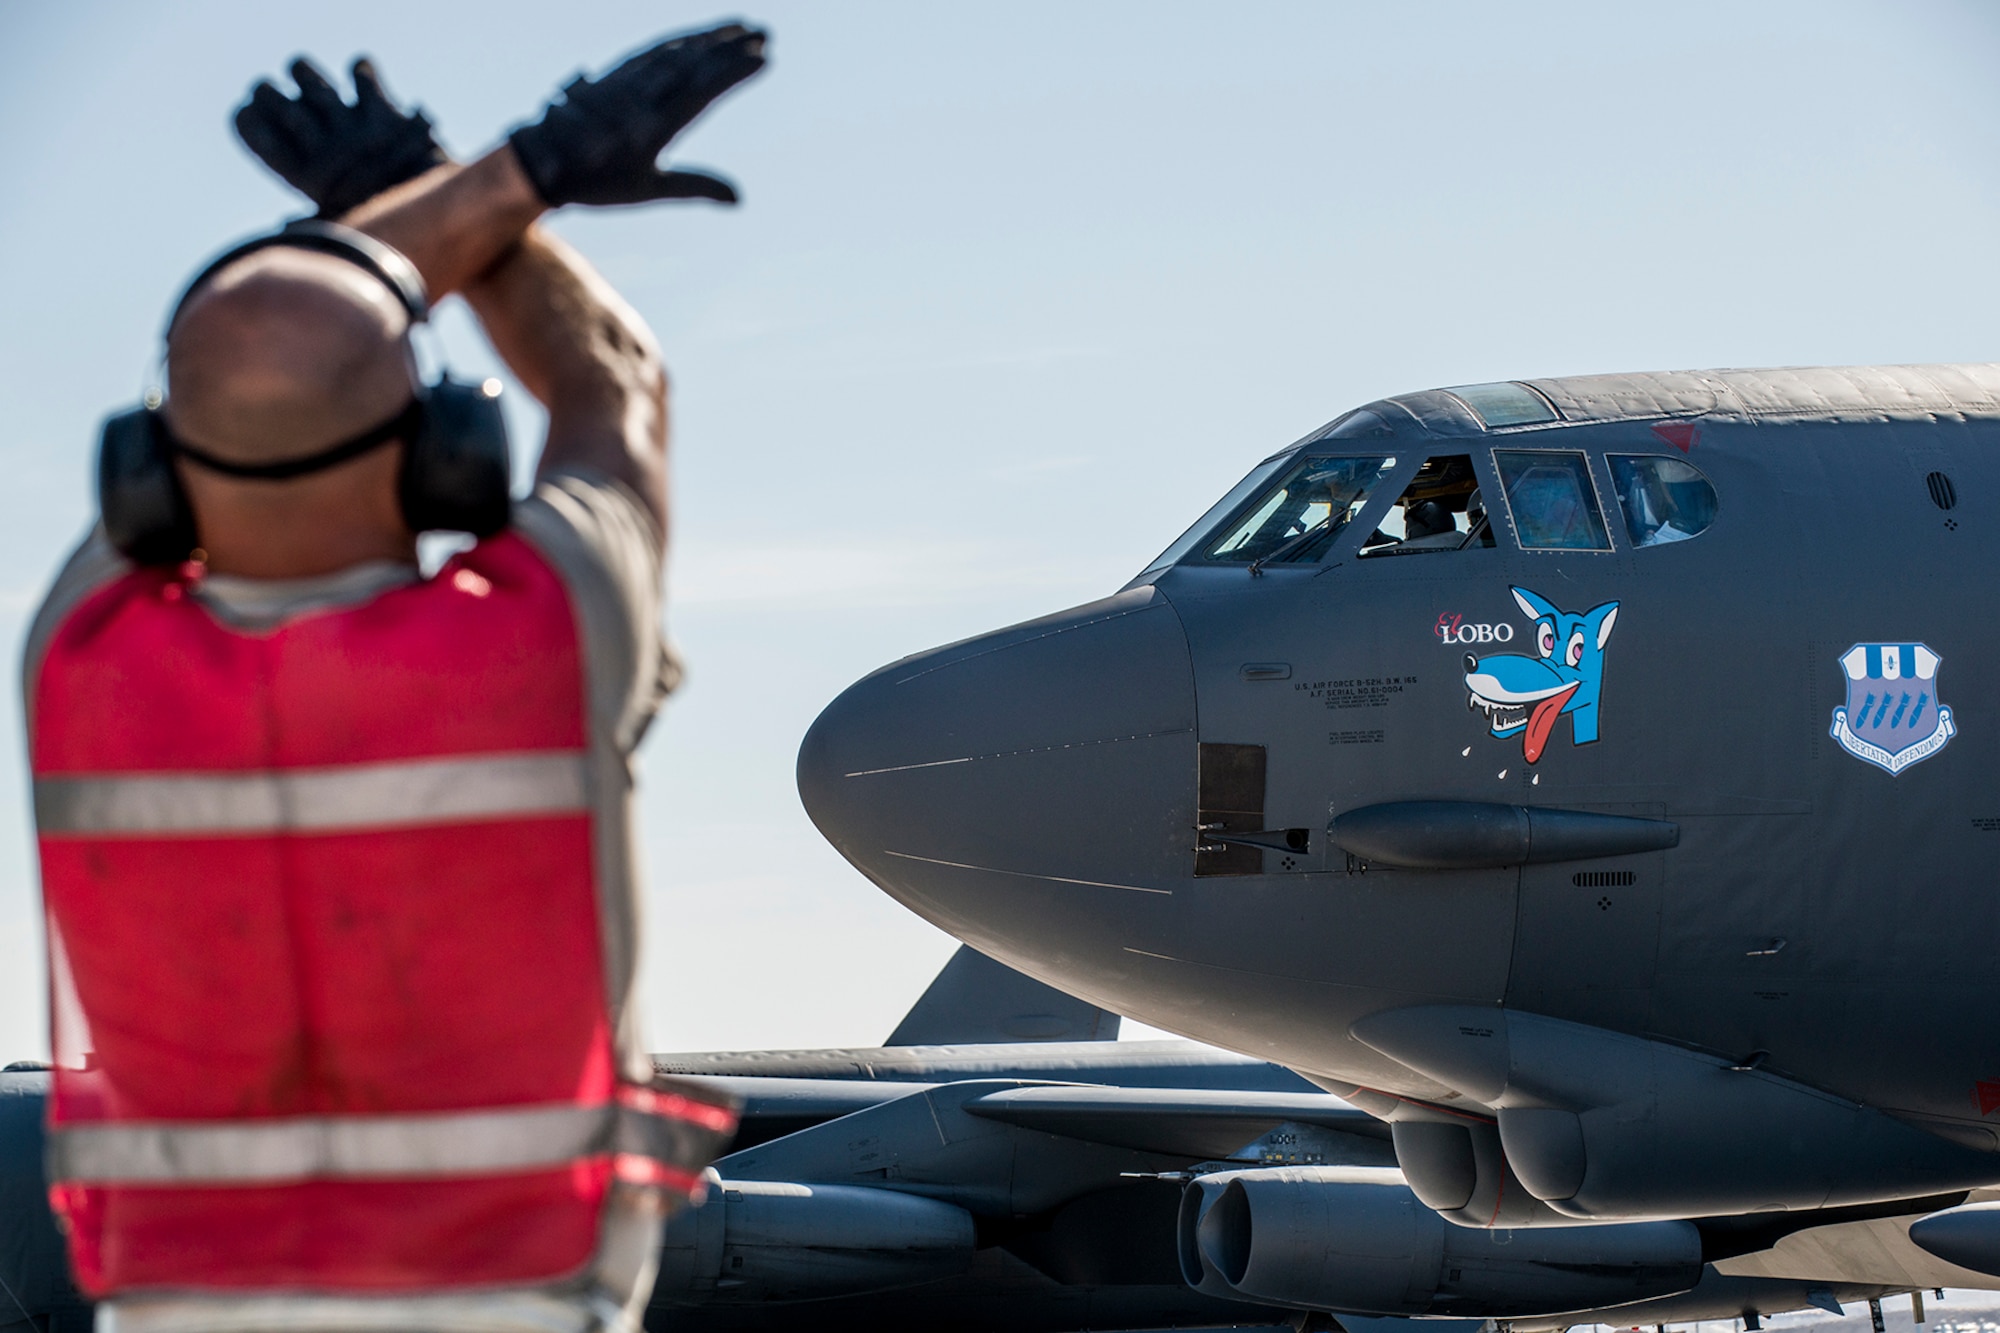 U.S. Air Force Tech. Sgt. James Spencer, a 307th Aircraft Maintenance Squadron crew chief, gives the “hold the breaks” symbol to the pilot of a B-52H Stratofortress before it takes off on for a mission on June 8, 2016, Nellis Air Force Base, Nev. Spencer is among 45 Active Duty and Air Force Reserve maintenance personnel on temporary duty at Nellis in support of the 340th Weapons Squadron. (U.S. Air Force photo by Master Sgt. Greg Steele/Released)